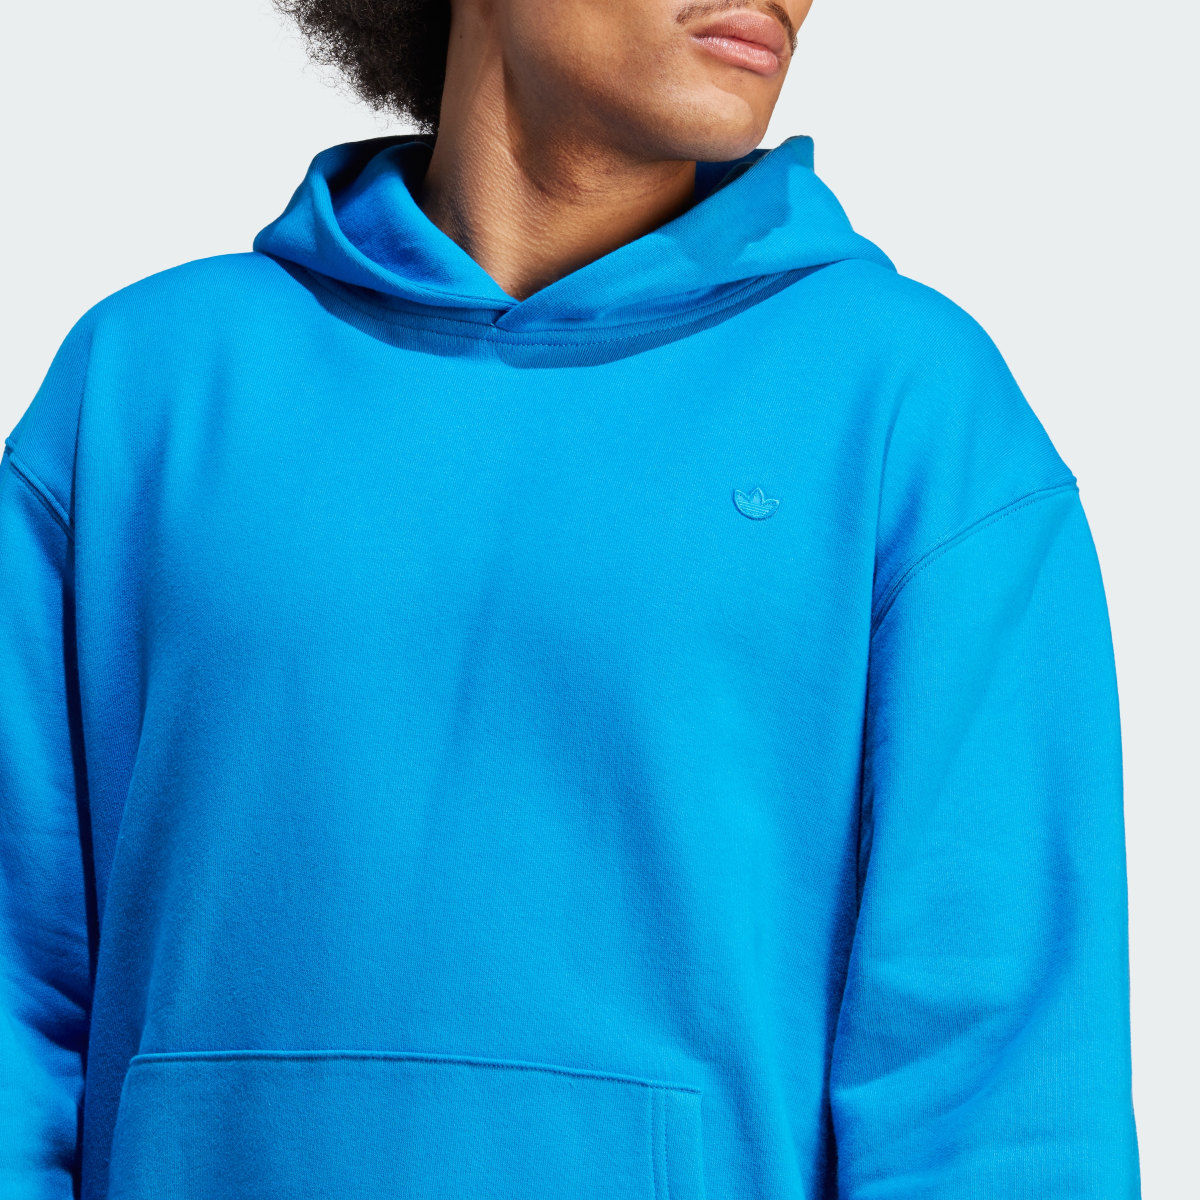 Adidas Adicolor Contempo French Terry Hoodie. 6